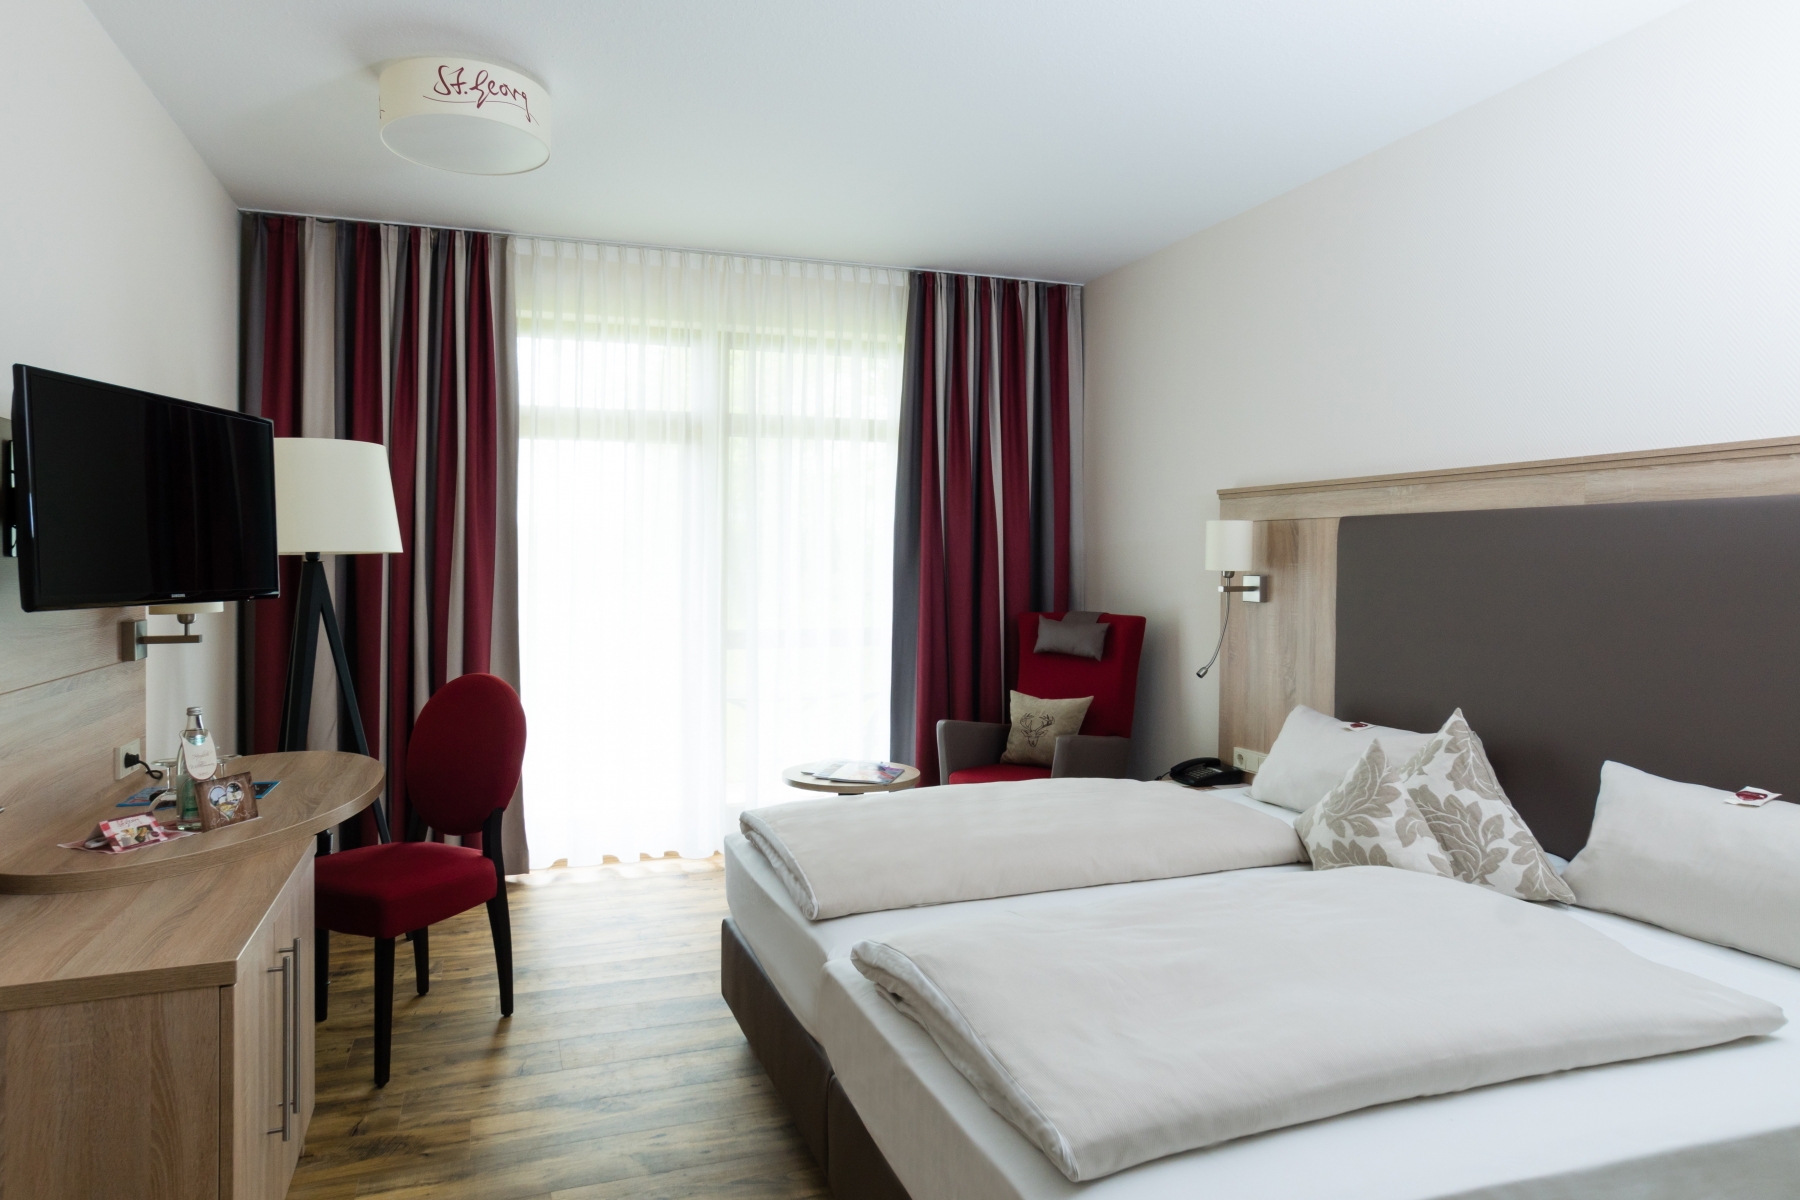 Hotel St. Georg Bad Aibling <br/>119.00 ew <br/> <a href='http://vakantieoplossing.nl/outpage/?id=44c8ebaeef5a9cd8e1b79342f933265f' target='_blank'>View Details</a>